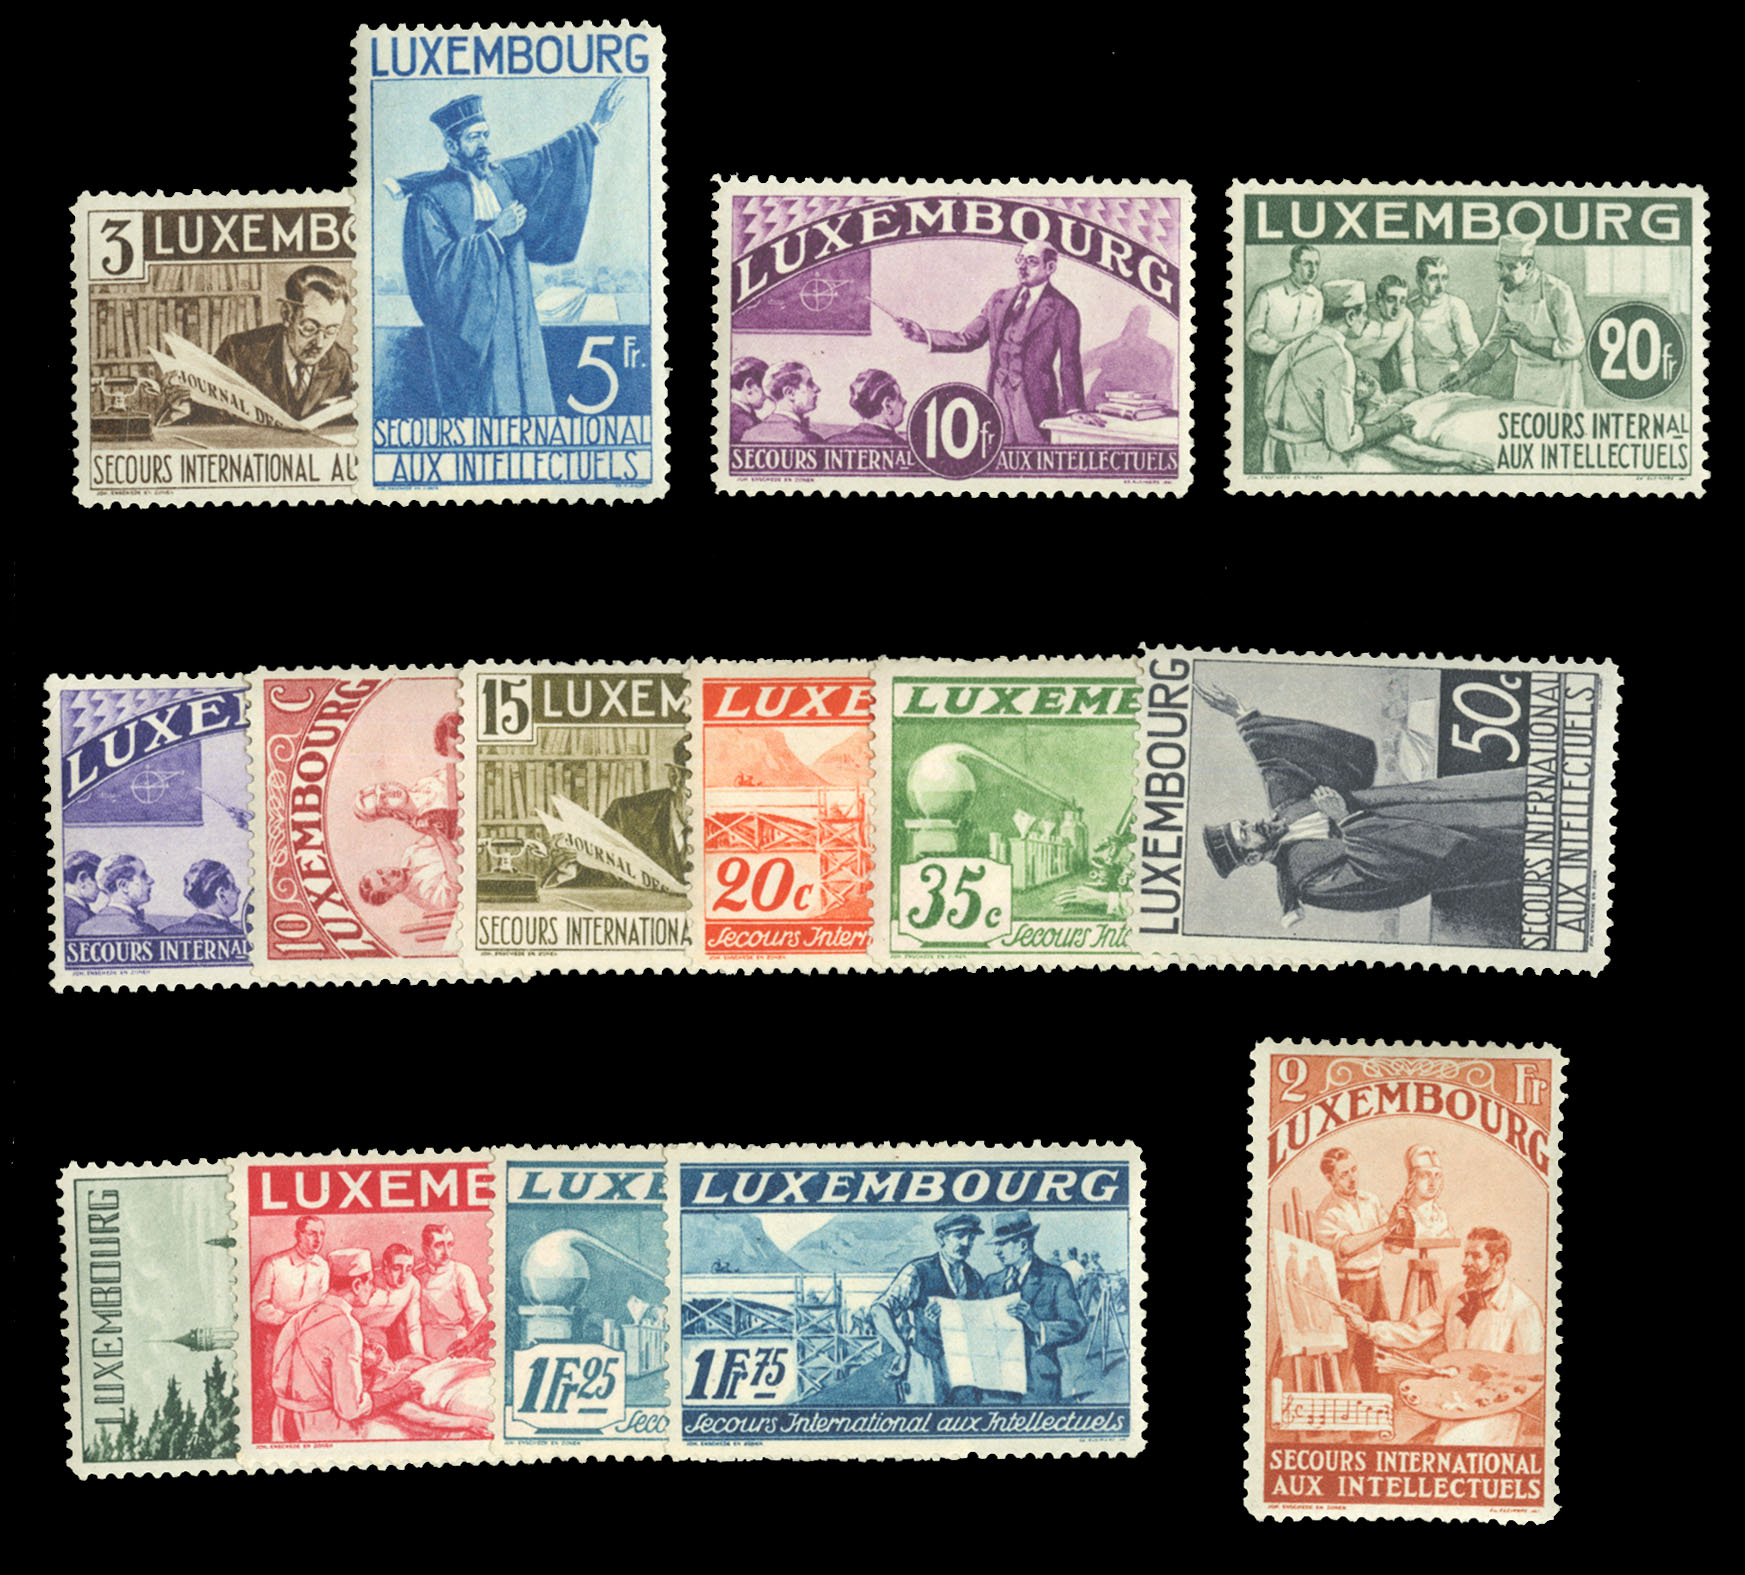 Lot 1087 - Portugal  -  Cherrystone Auctions U.S. & Worldwide Stamps & Postal History